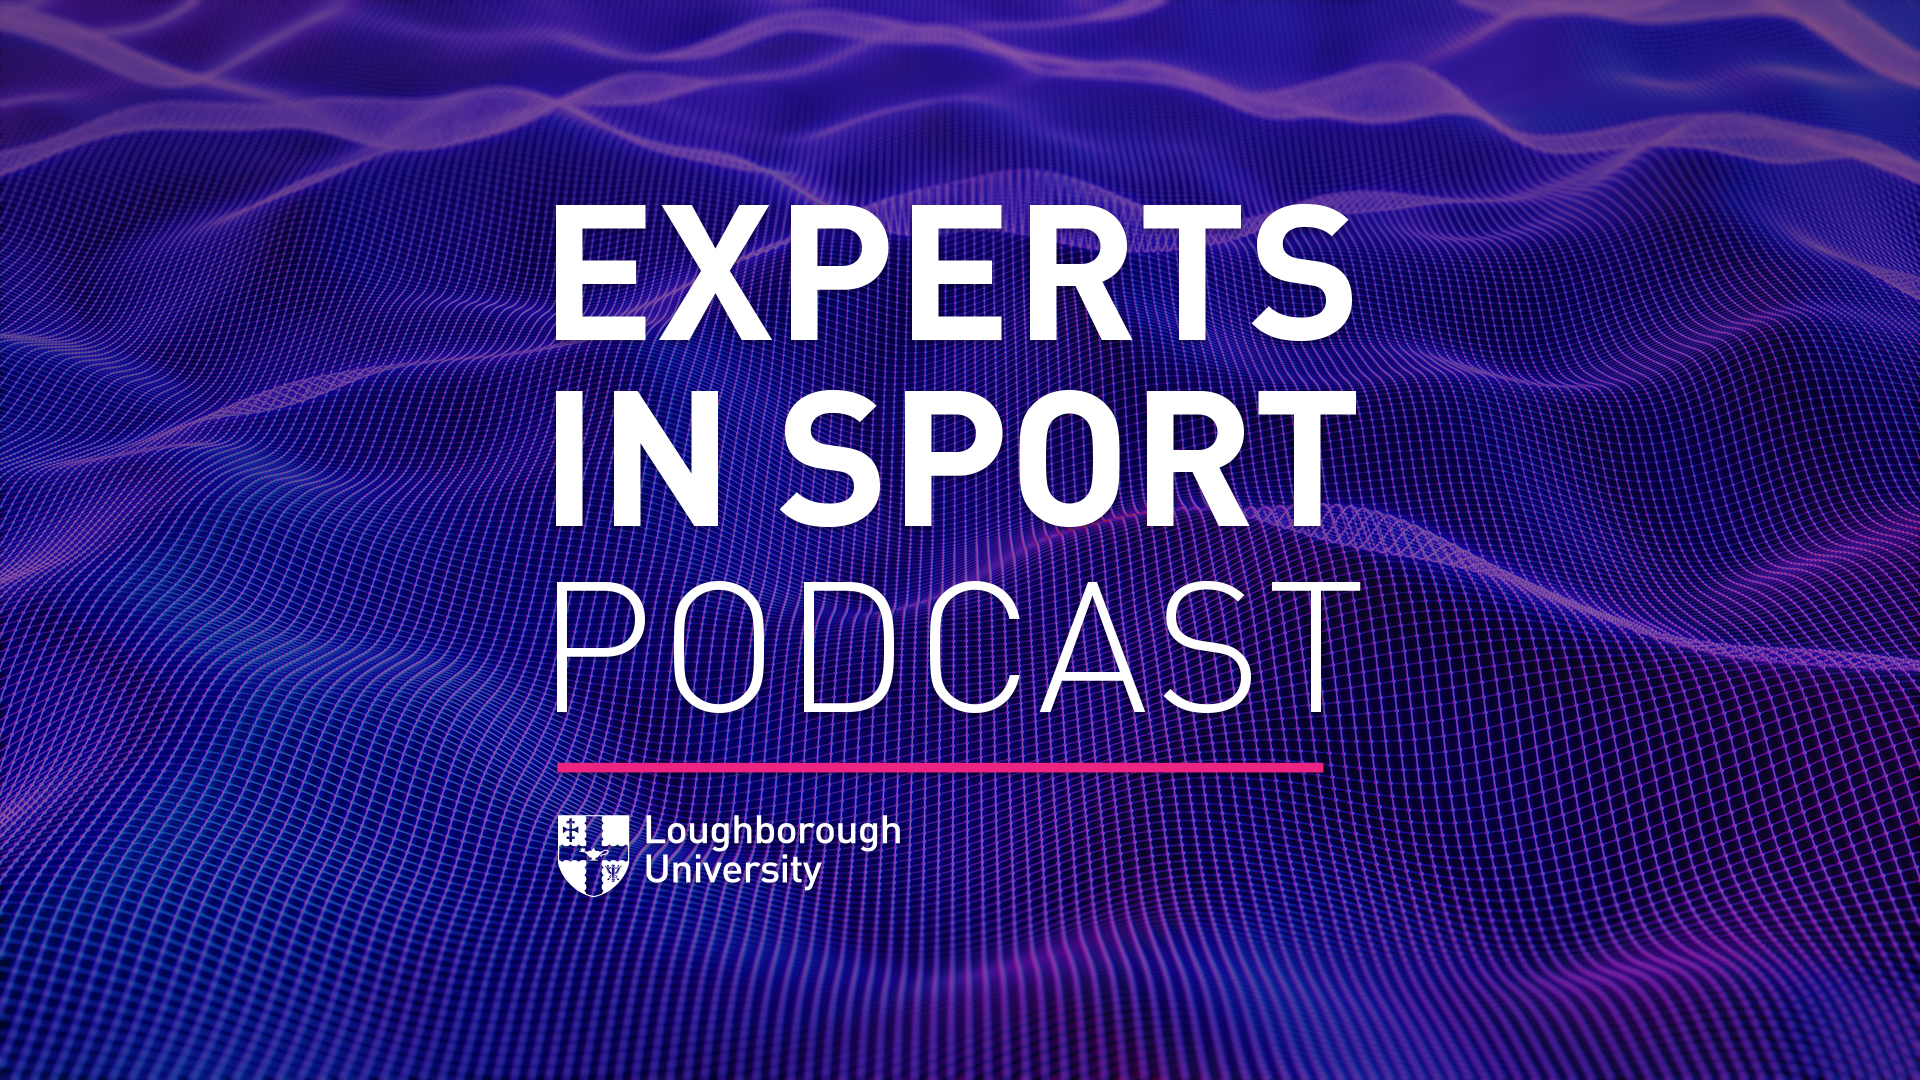 Experts in Sport: Metaverse topic